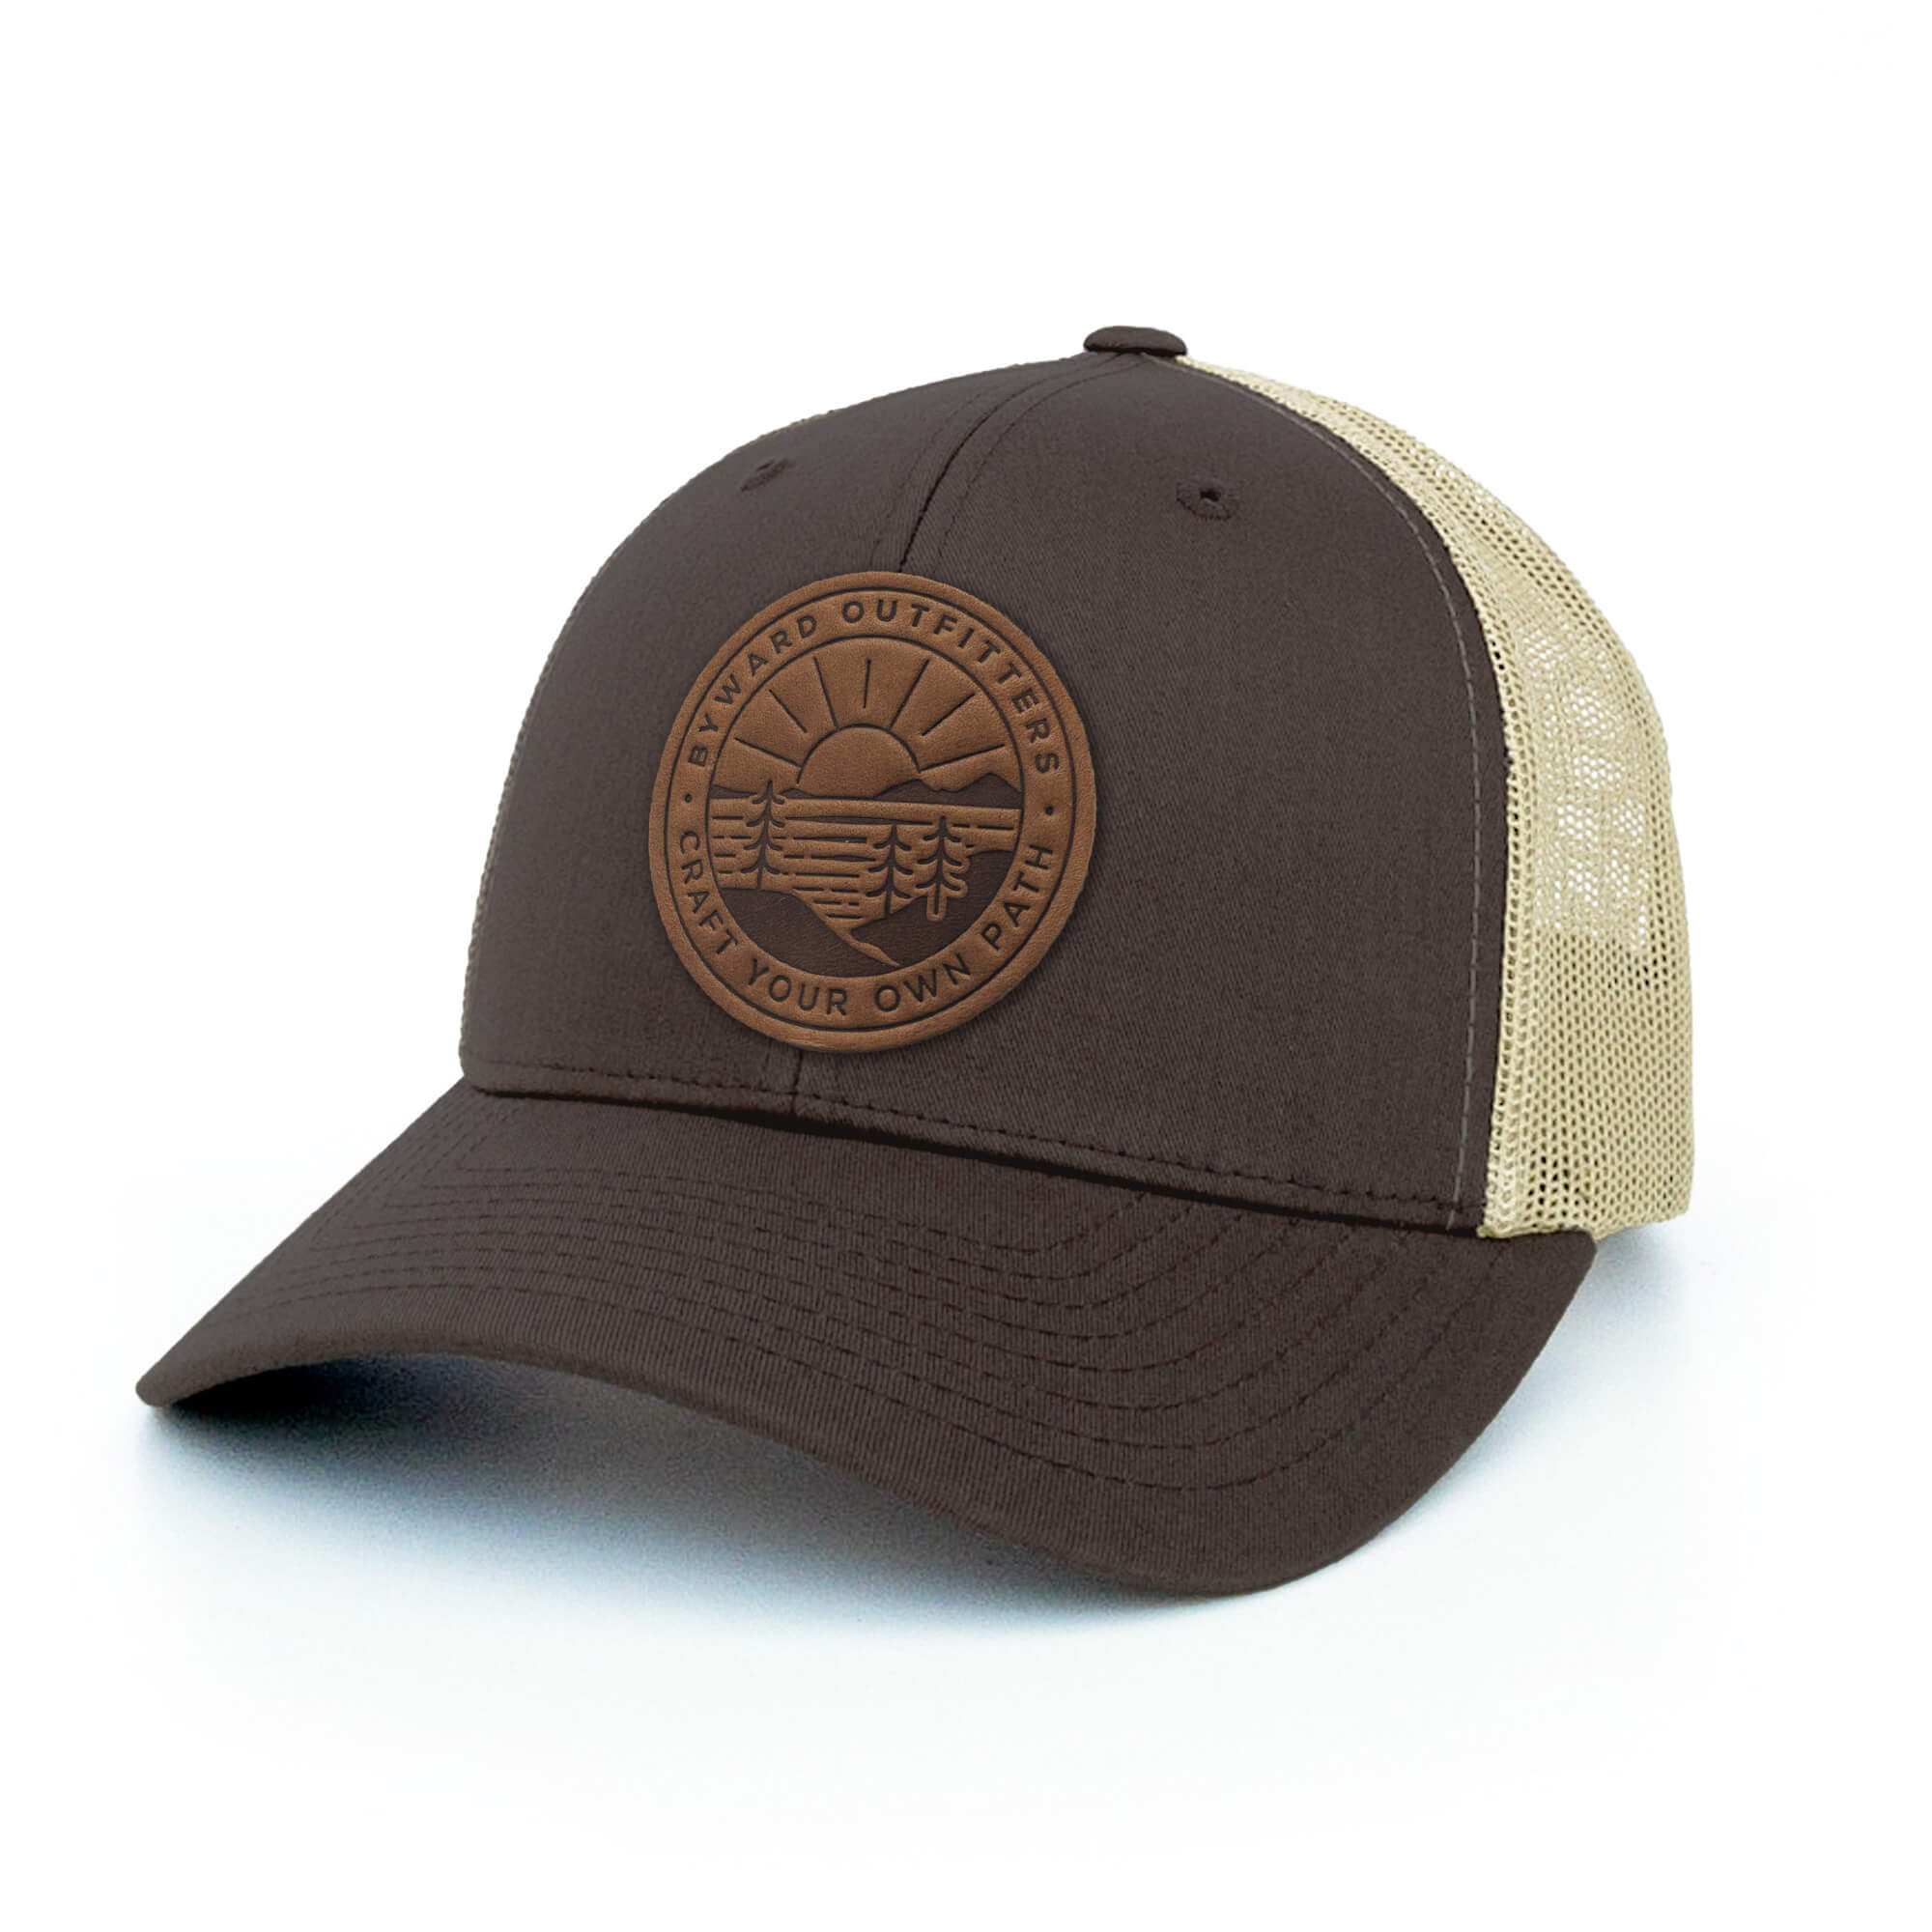 Brown and khaki trucker hat with full-grain leather patch of Scenic Sunrise | BLACK-005-002, CHARC-005-002, NAVY-005-002, HGREY-005-002, MOSS-005-002, BROWN-005-002